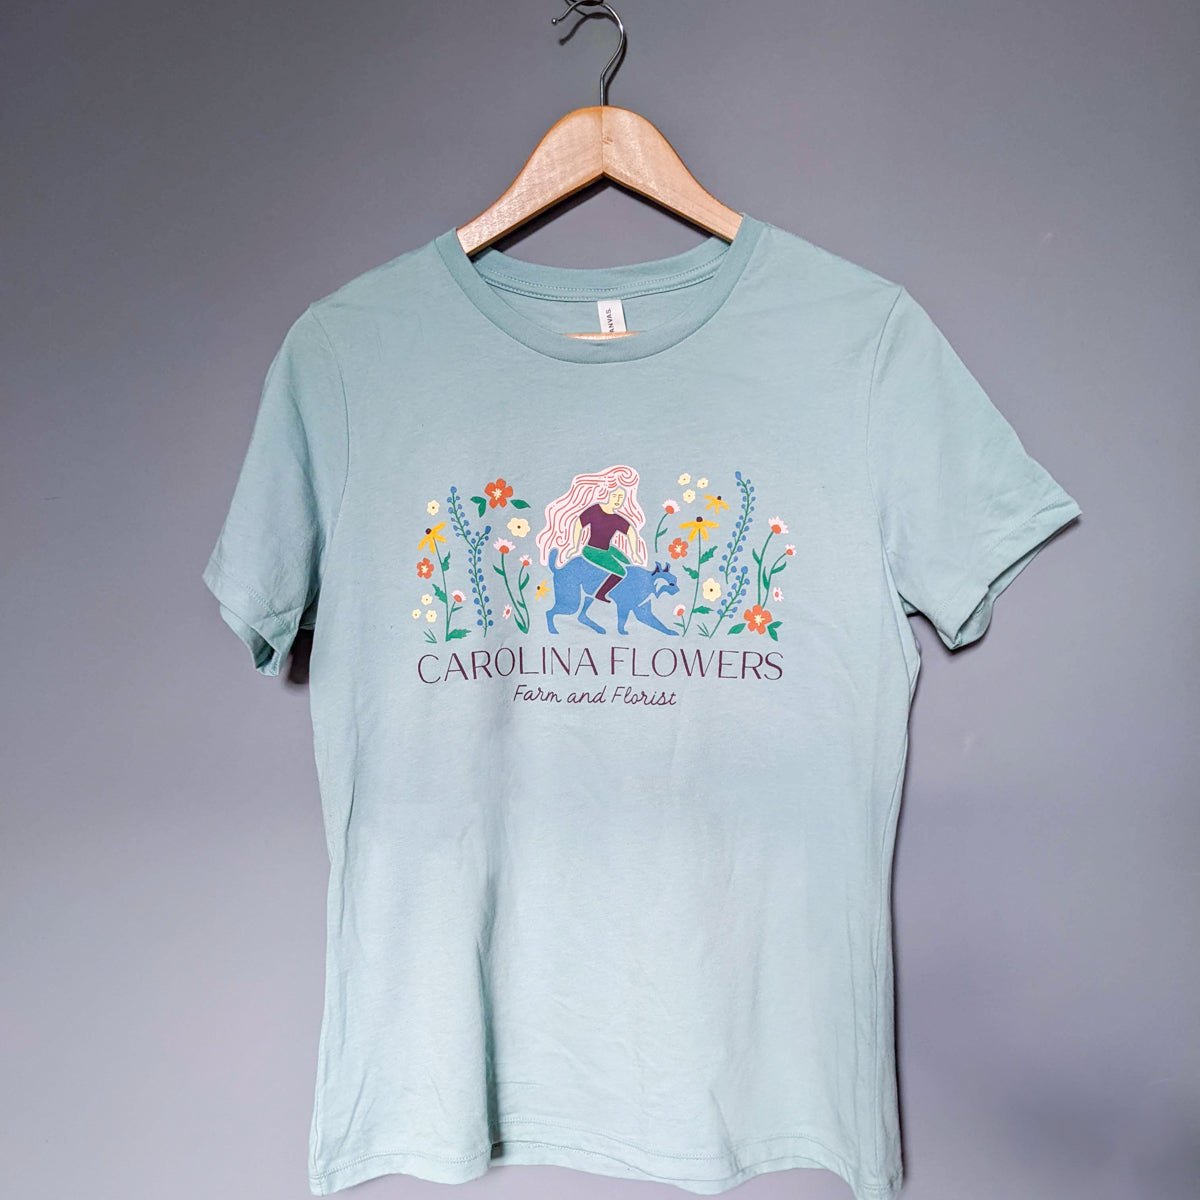 Fitted Blue T-Shirt with Carolina Flowers Logo